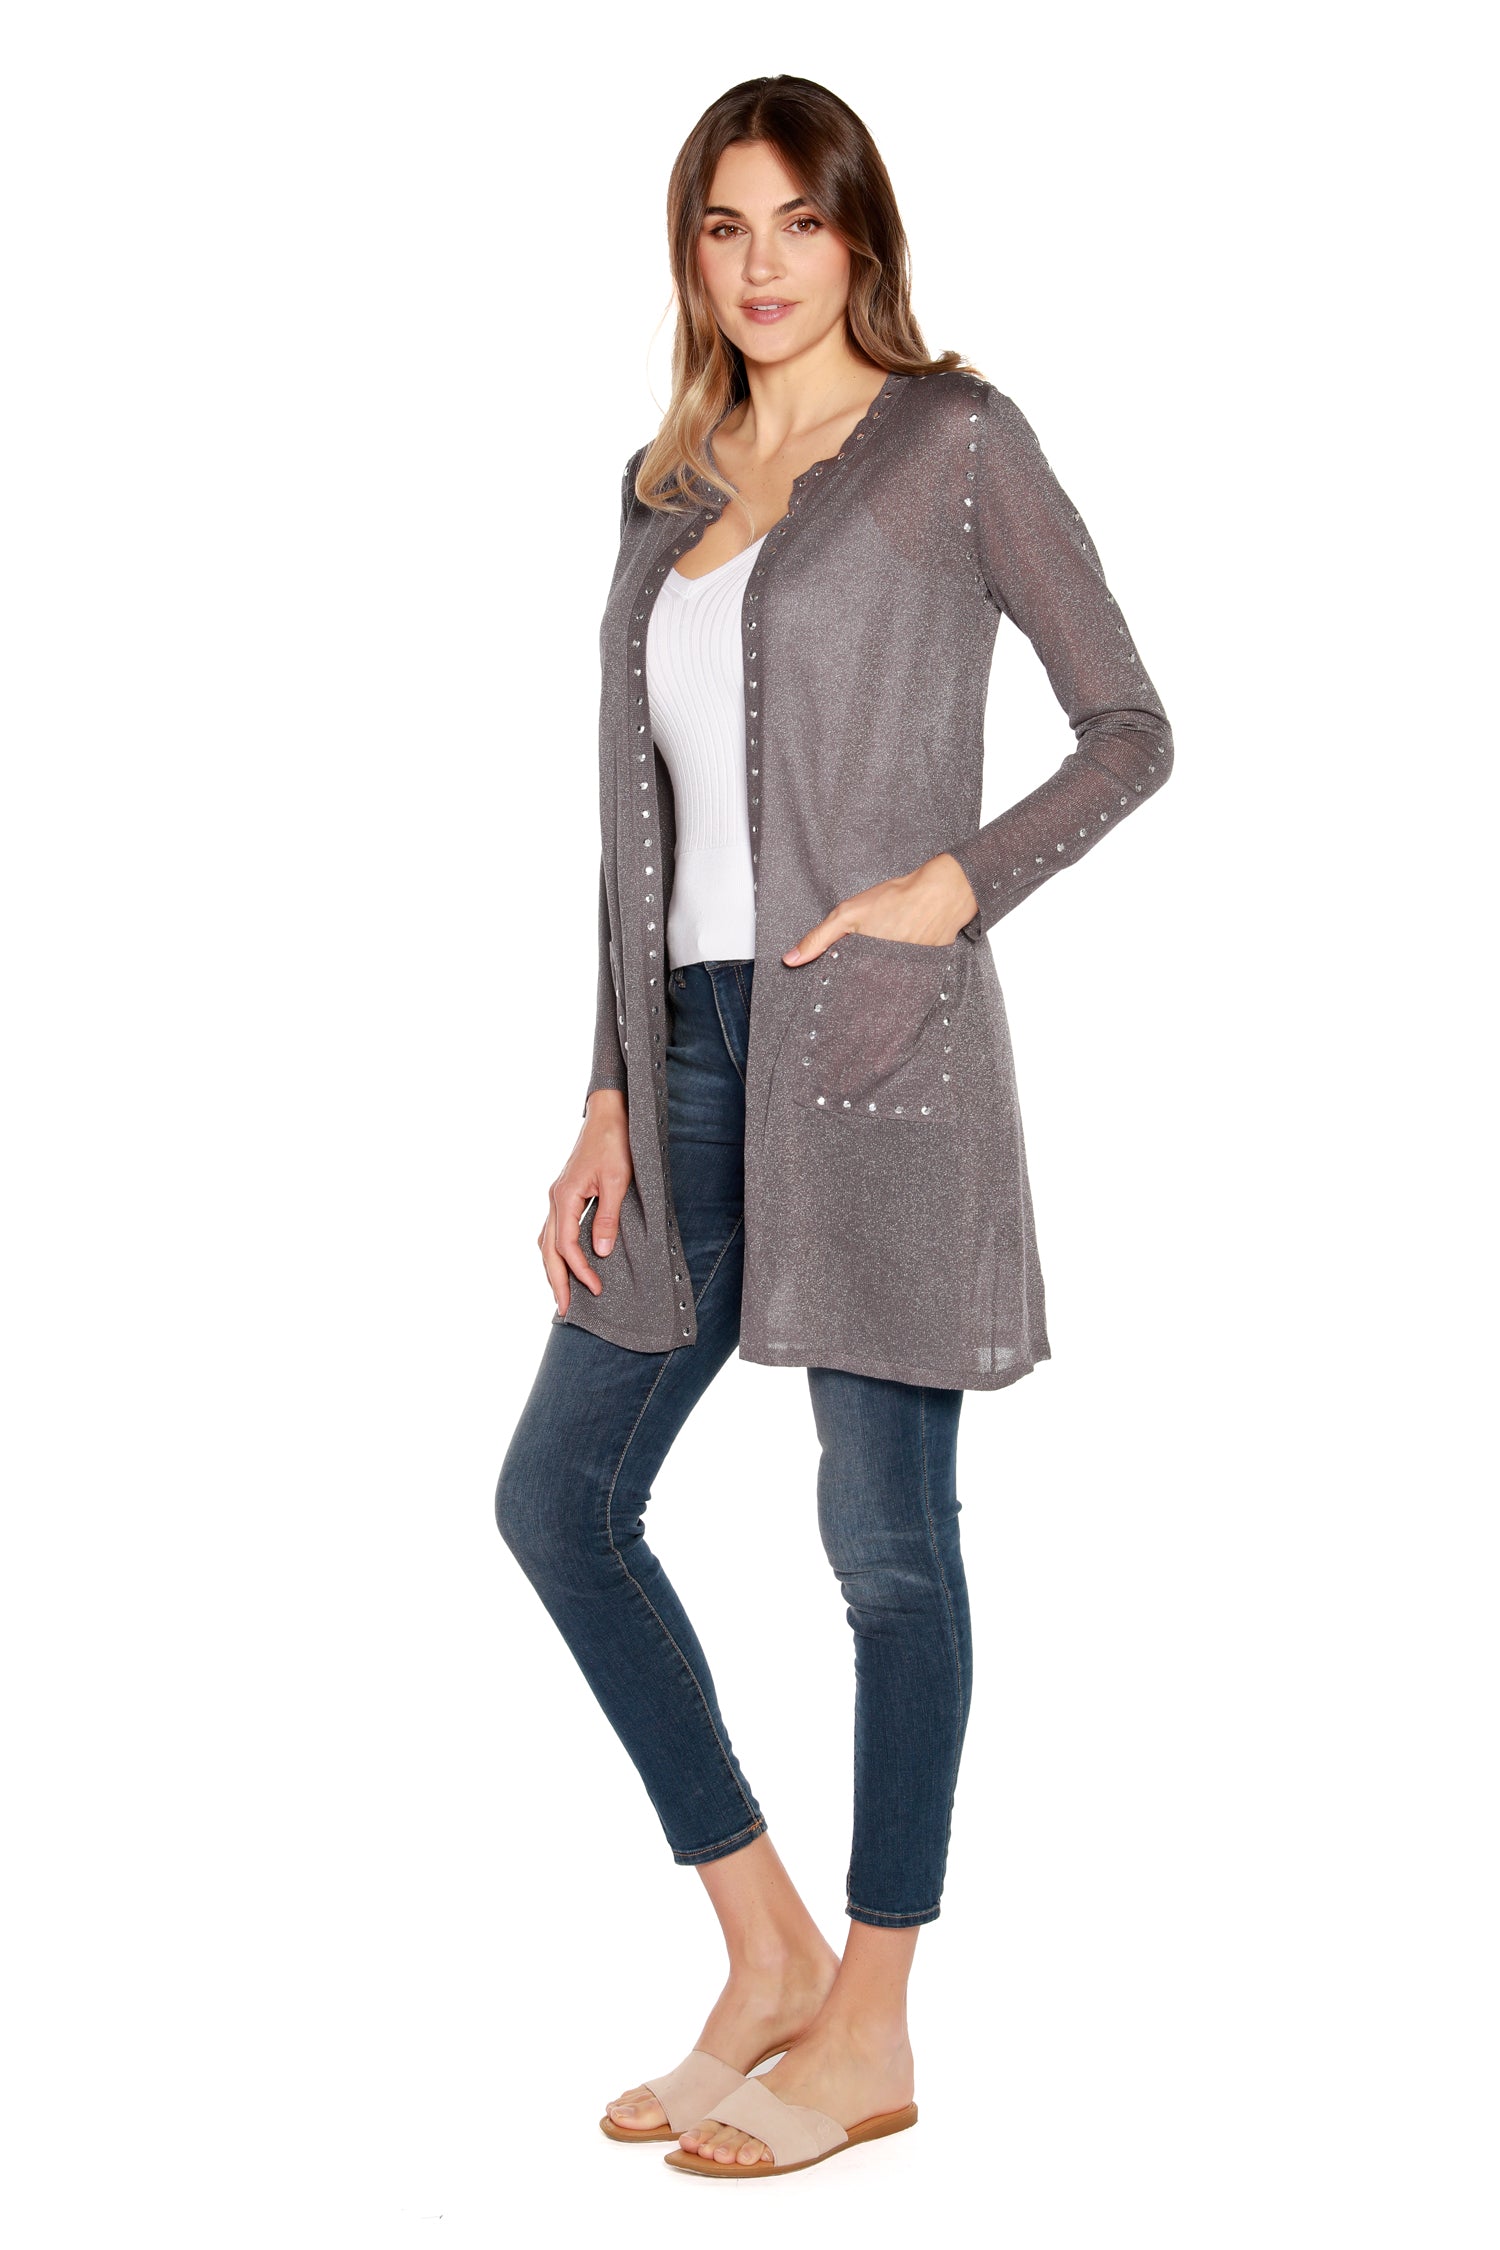 Women's Long Sleeve Sheer Cardigan with Rhinestud Trim and Pockets